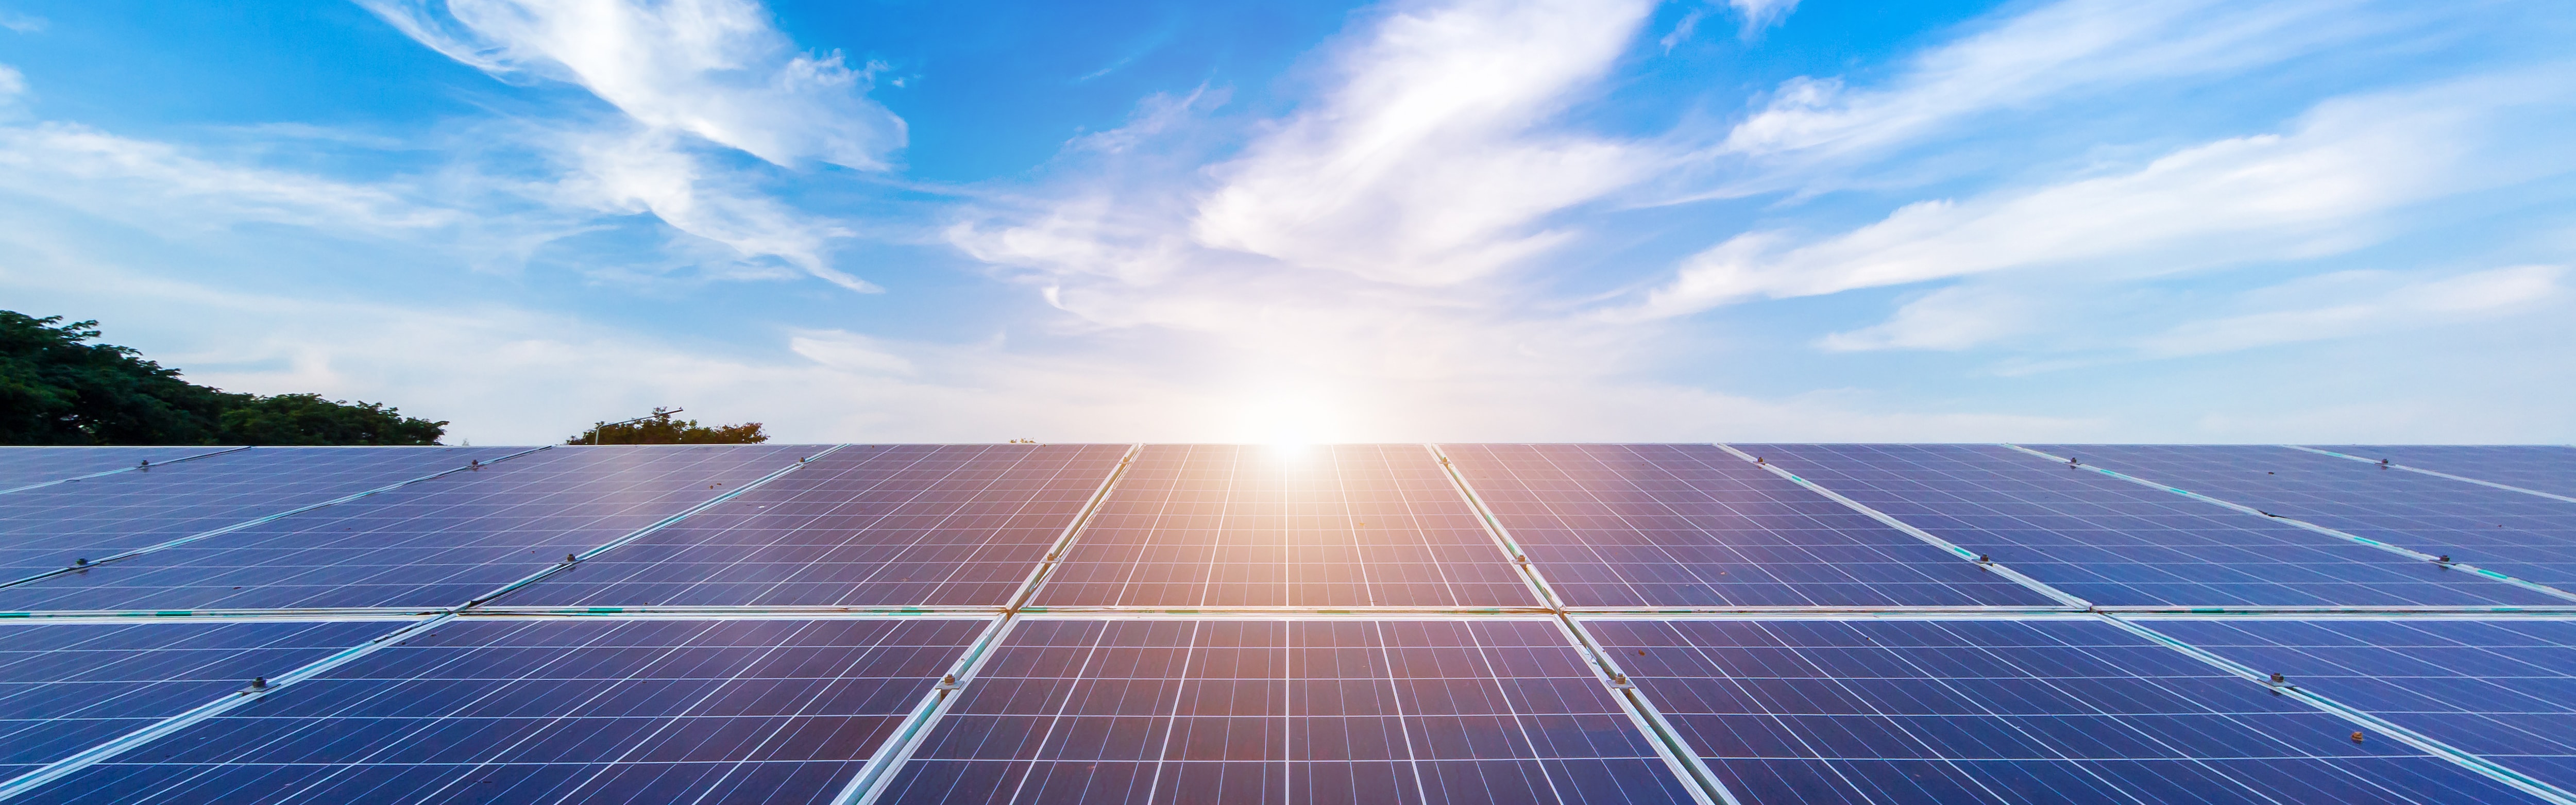 Next-generation solar cells pass strict international tests - The